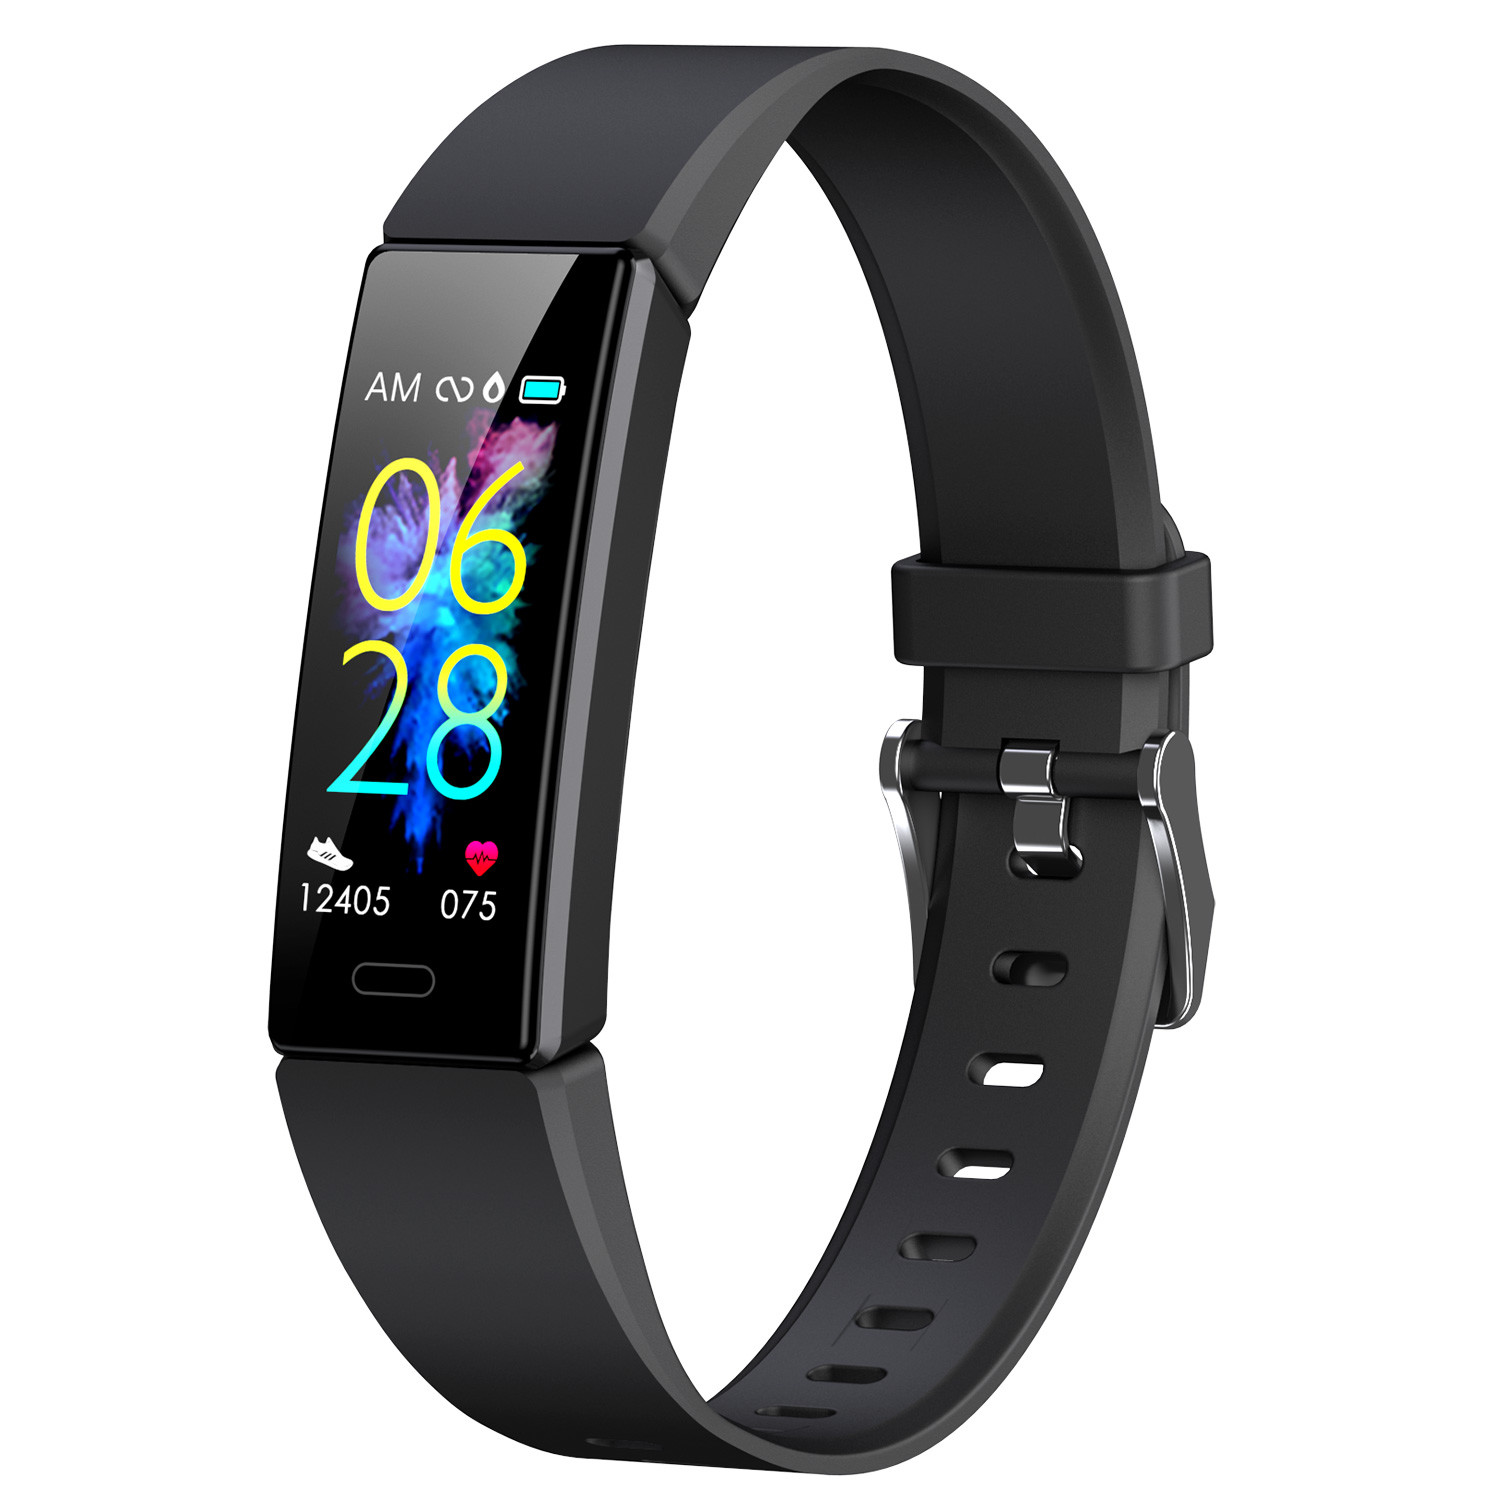 Buy cheap Multiple Sports Mode 160x80 Smart Bluetooth Wristband from wholesalers